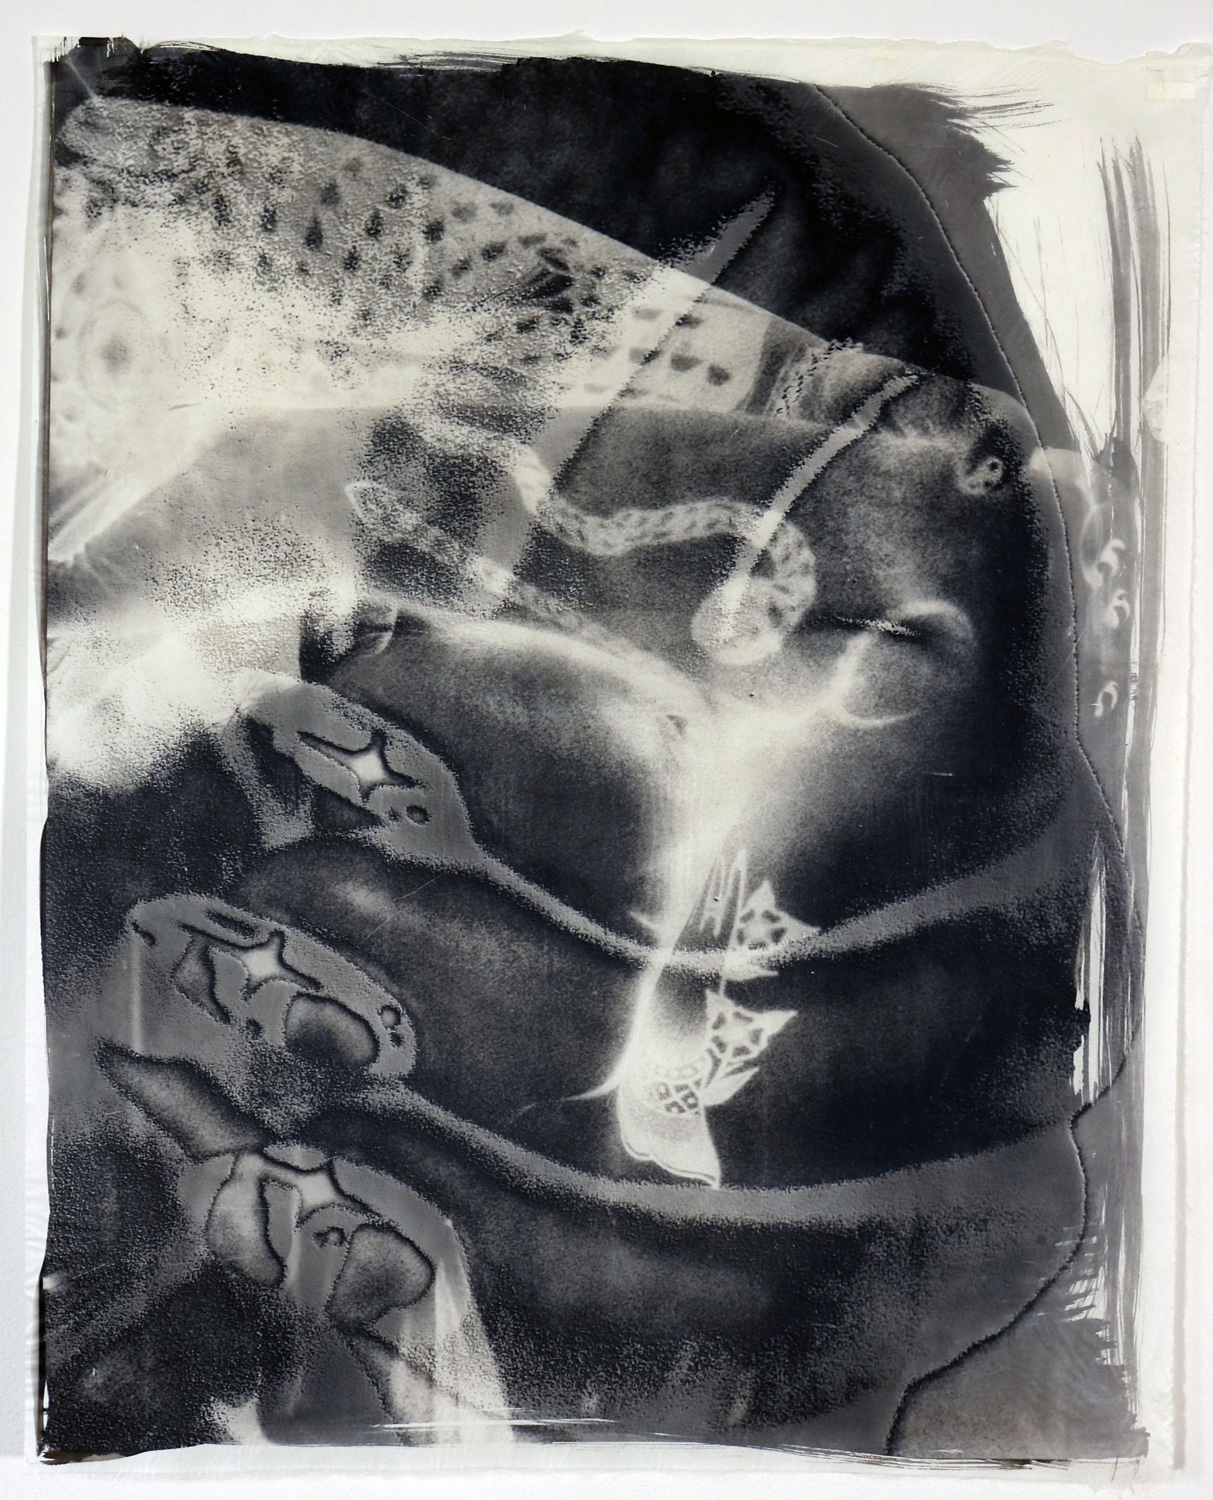 A double exposed print of a large hand embracing a woman with her arms crossed. The idea is that we must learn to embrace ourselves, especially in times of trouble.